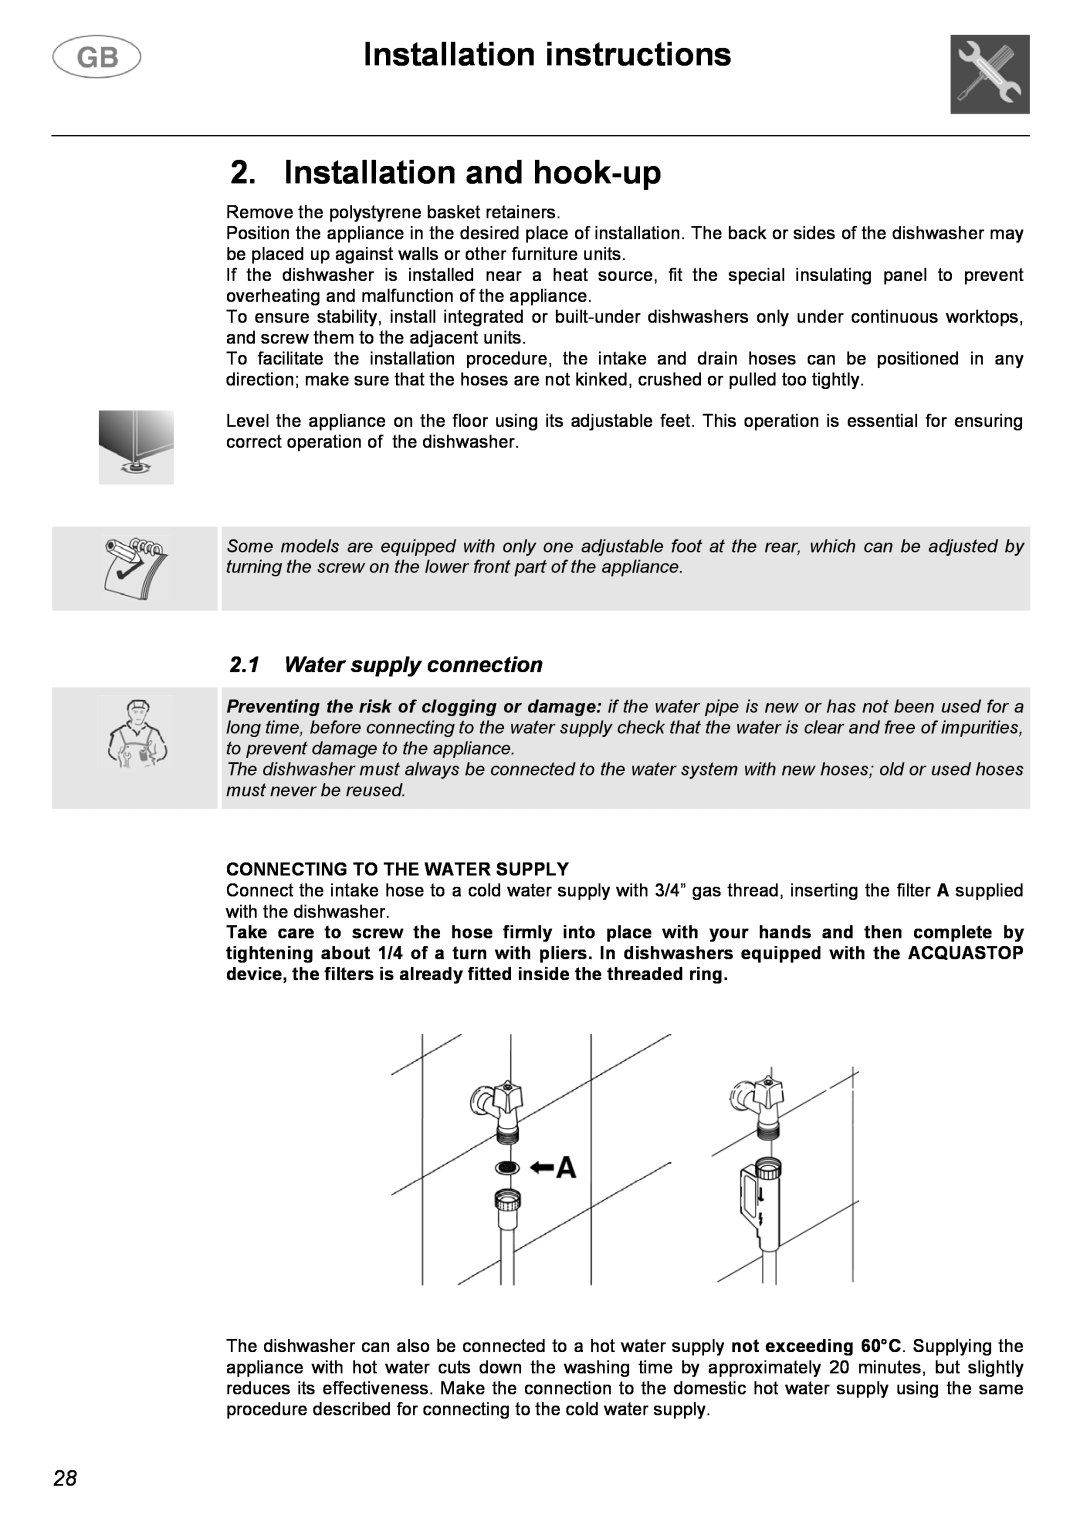 Smeg CA01-1 instruction manual Installation instructions, Installation and hook-up, 2.1Water supply connection 